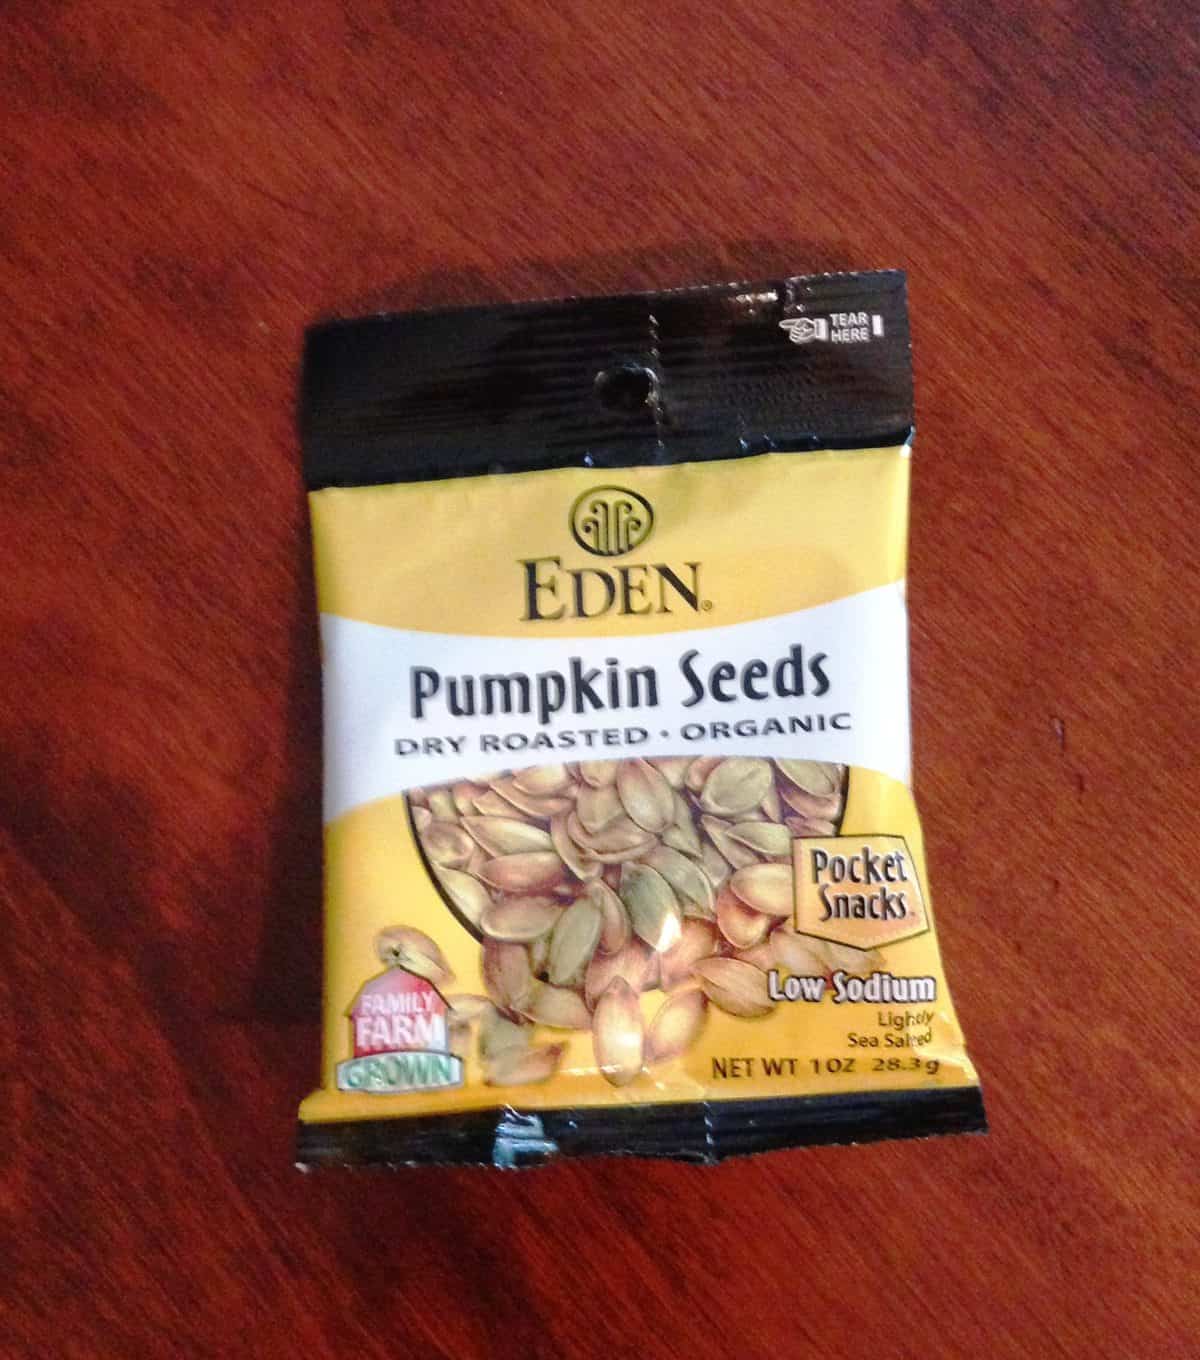 Bright Snack October 2016 Healthy Snack Box Review - Pumpkin Seeds